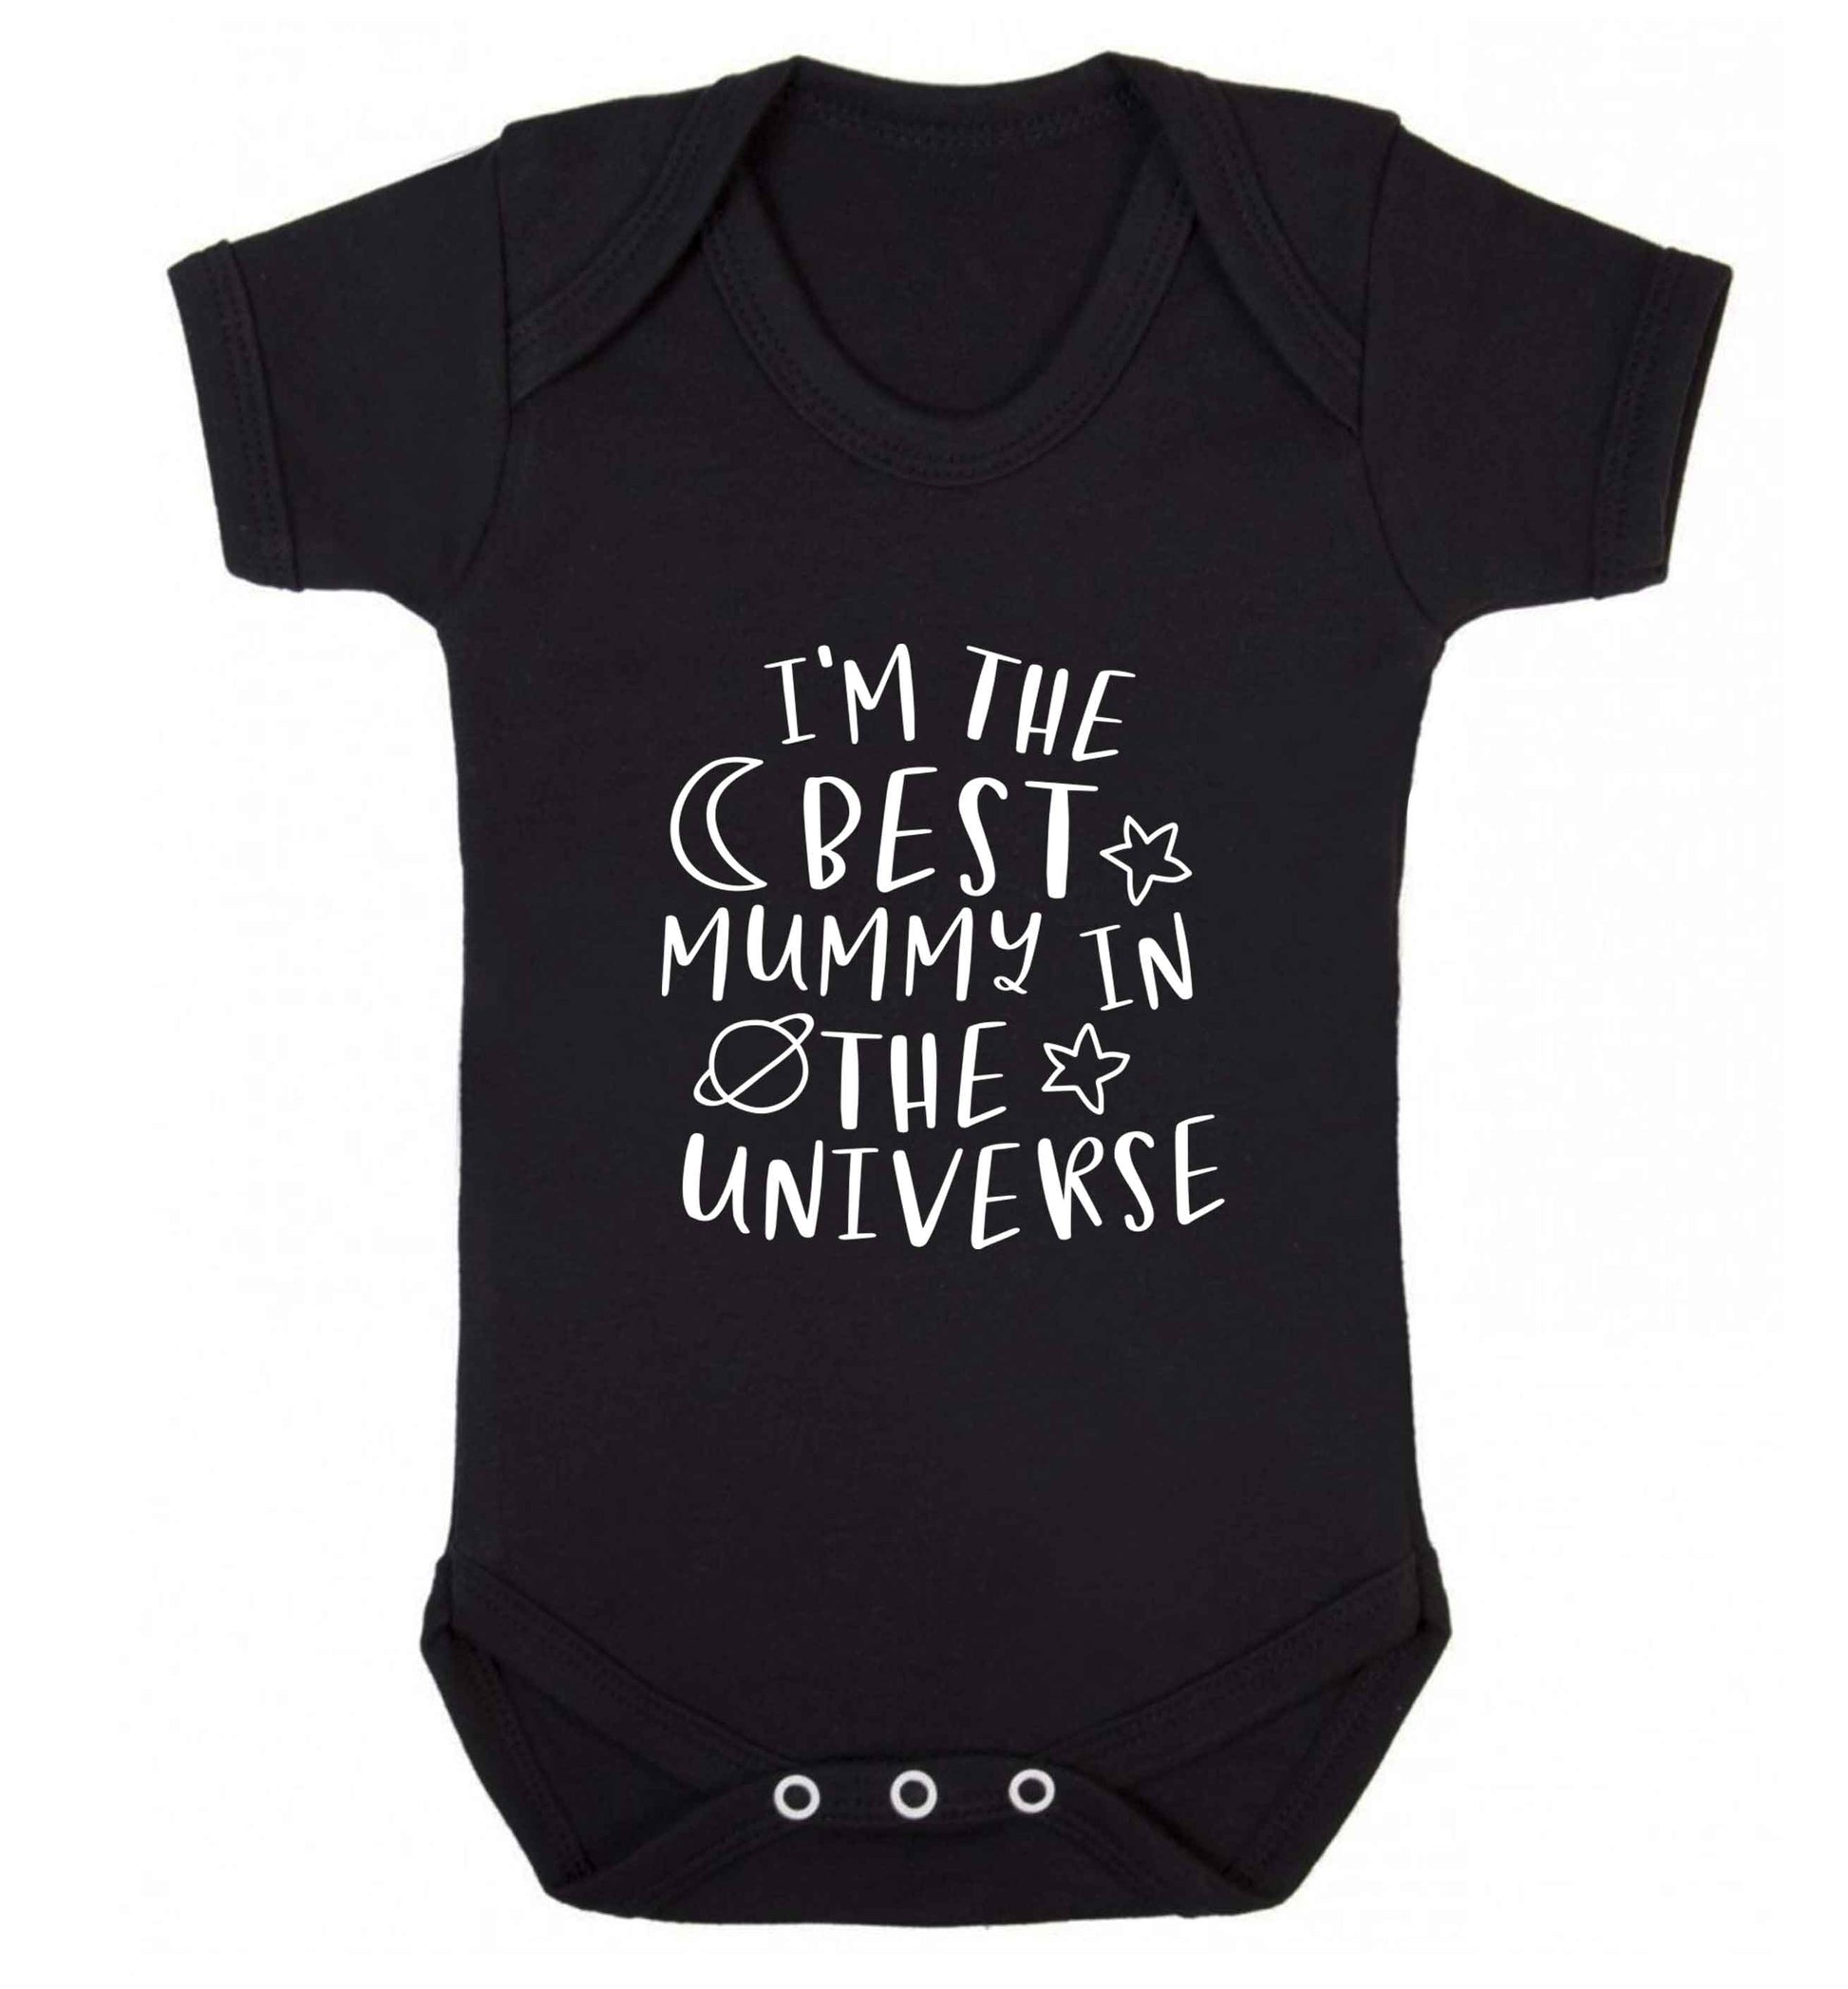 I'm the best mummy in the universe baby vest black 18-24 months